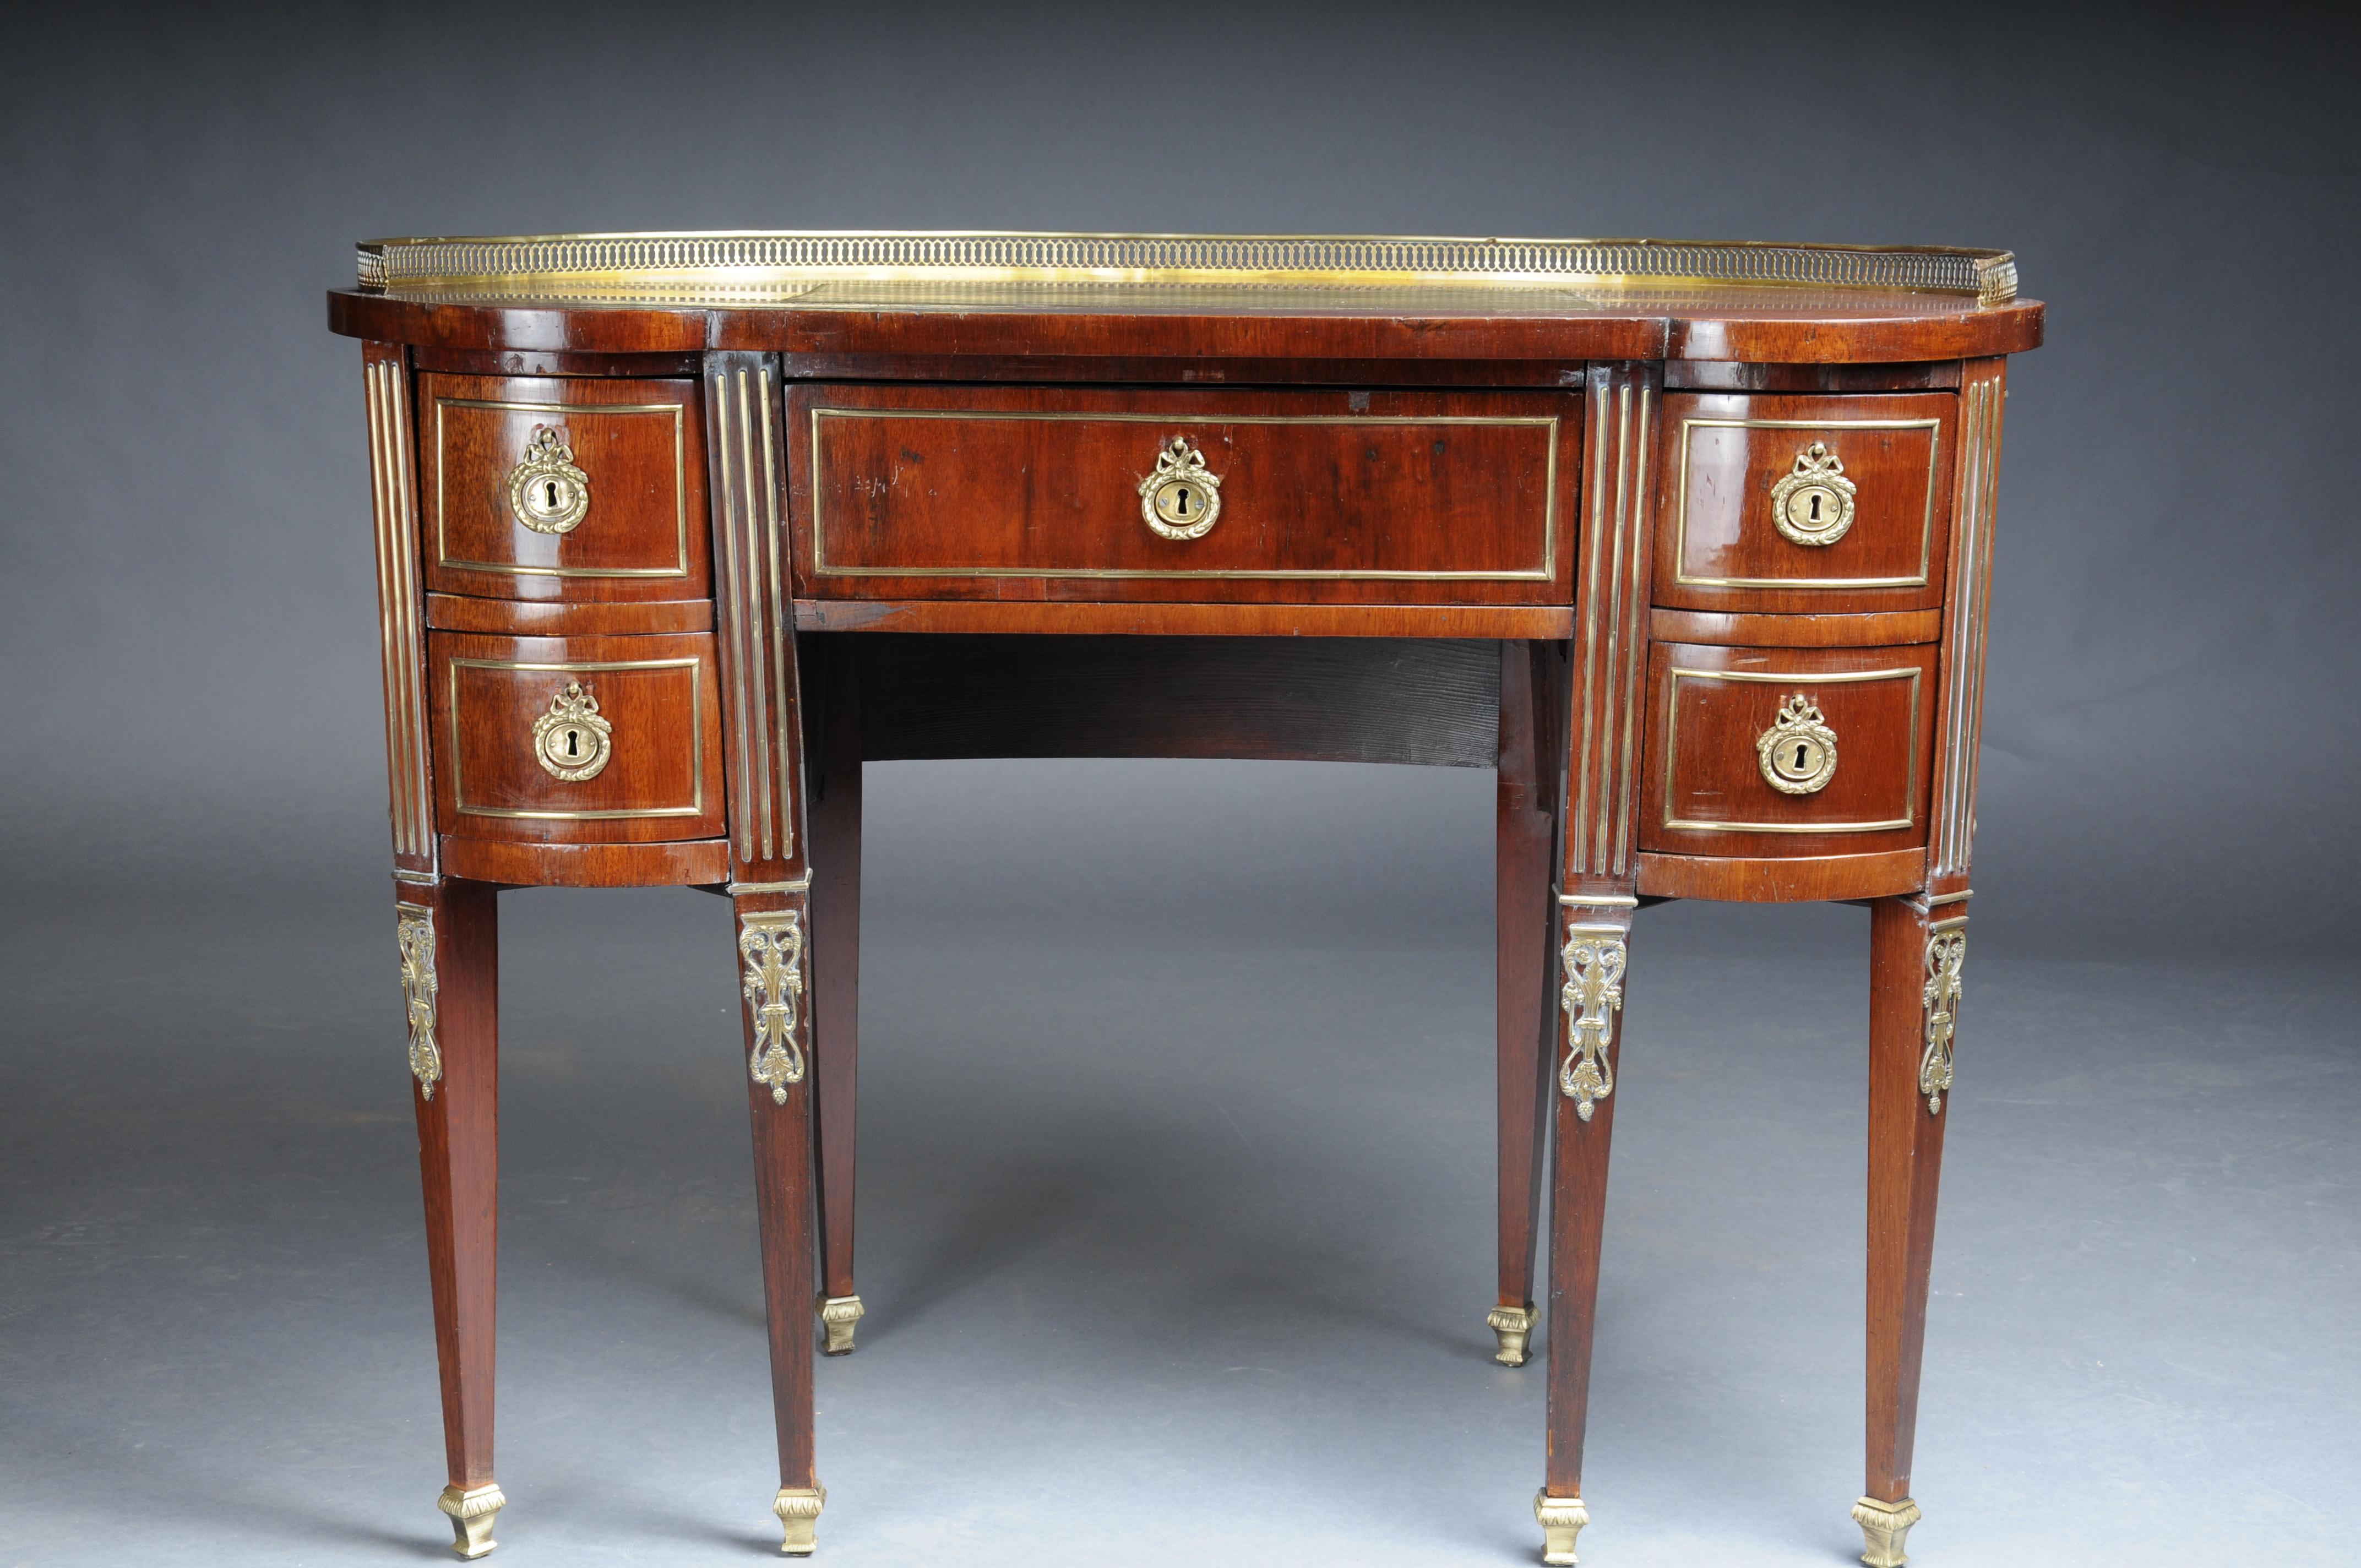 Delicate antique mahogany ladies' desk Louis XVI, Paris 1880

Semi-circular solid mahogany wood body. Extremely rare form. With 5 lockable drawers. Cover plate framed with brass gallery, partly with centered green genuine leather plate.

Rich gilded